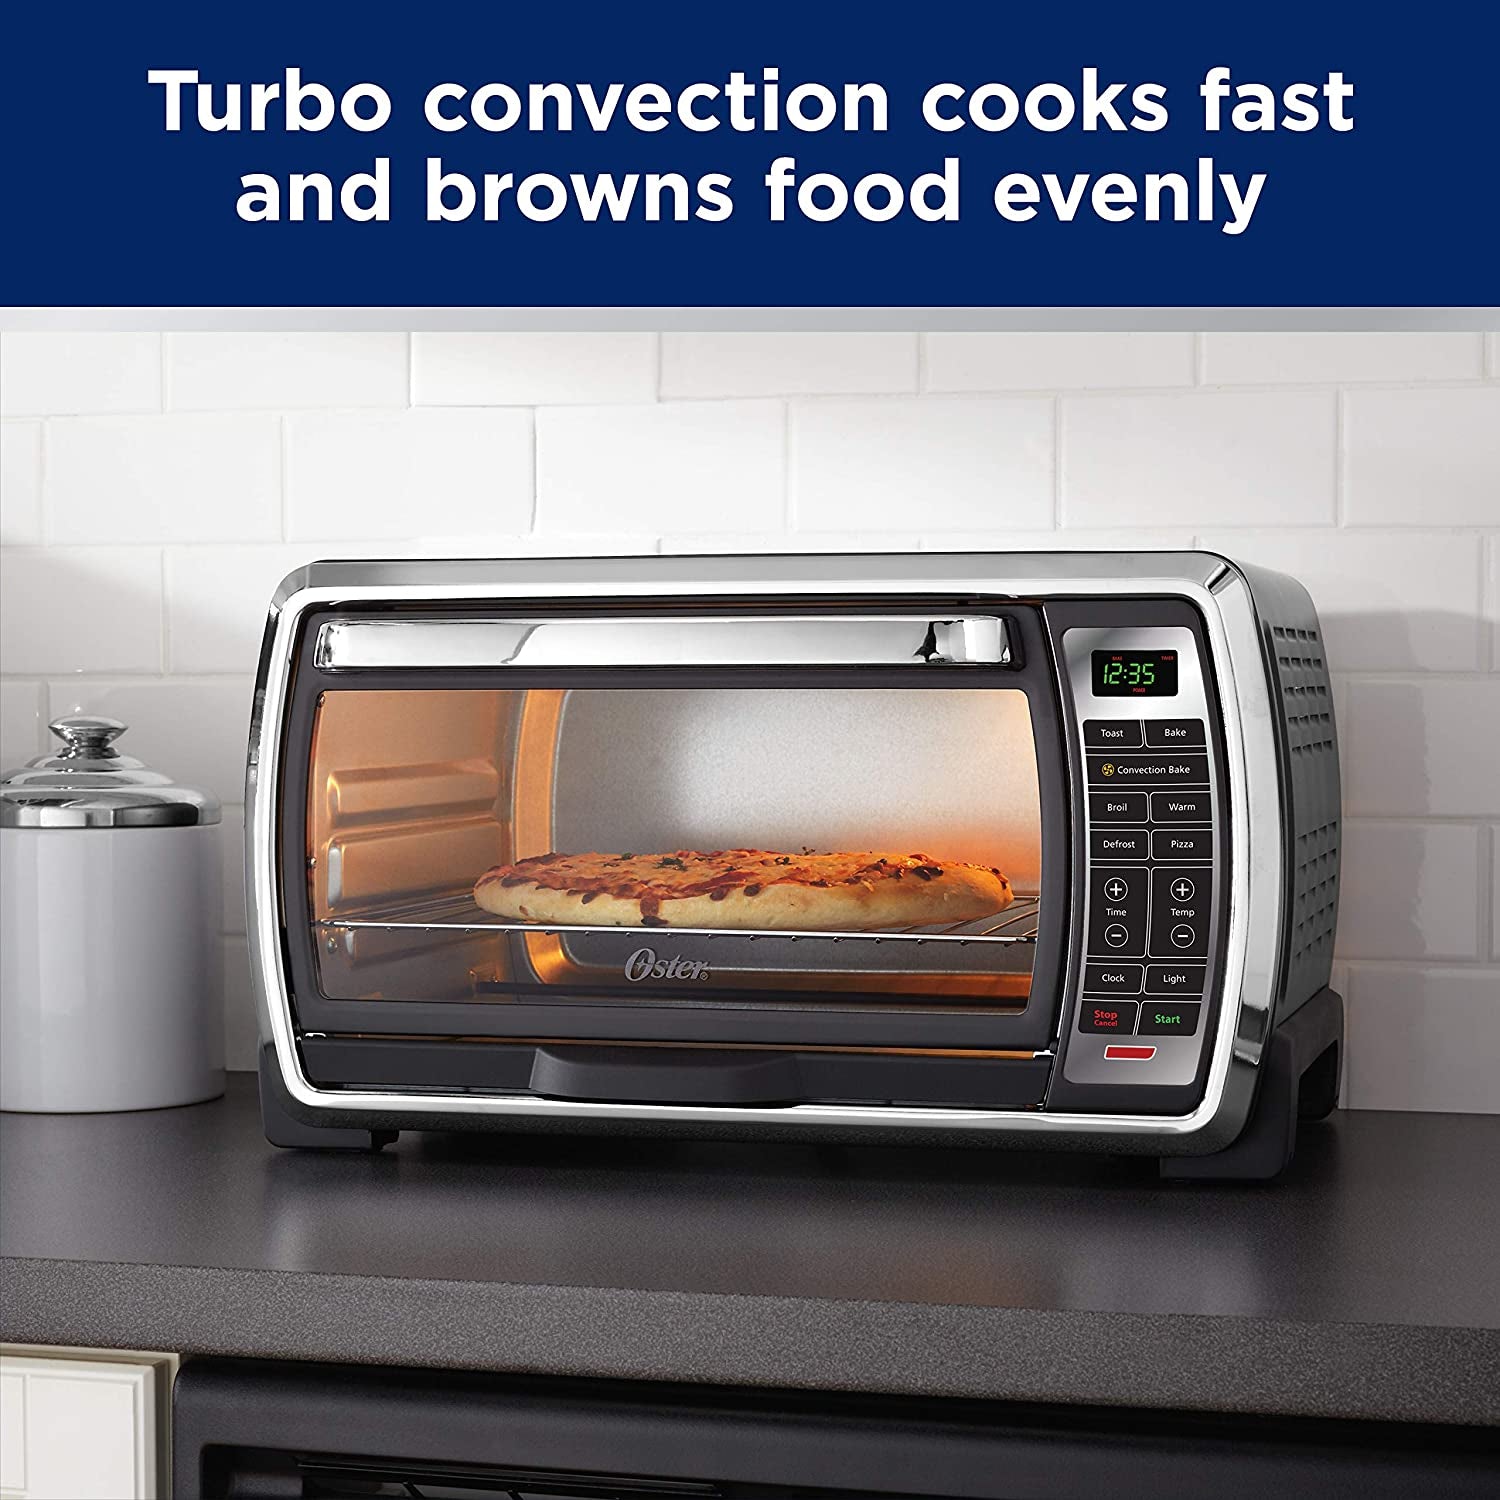 Digital Convection Toaster Oven | Spacious 6-Slice Capacity, Black/Polished Stainless Steel